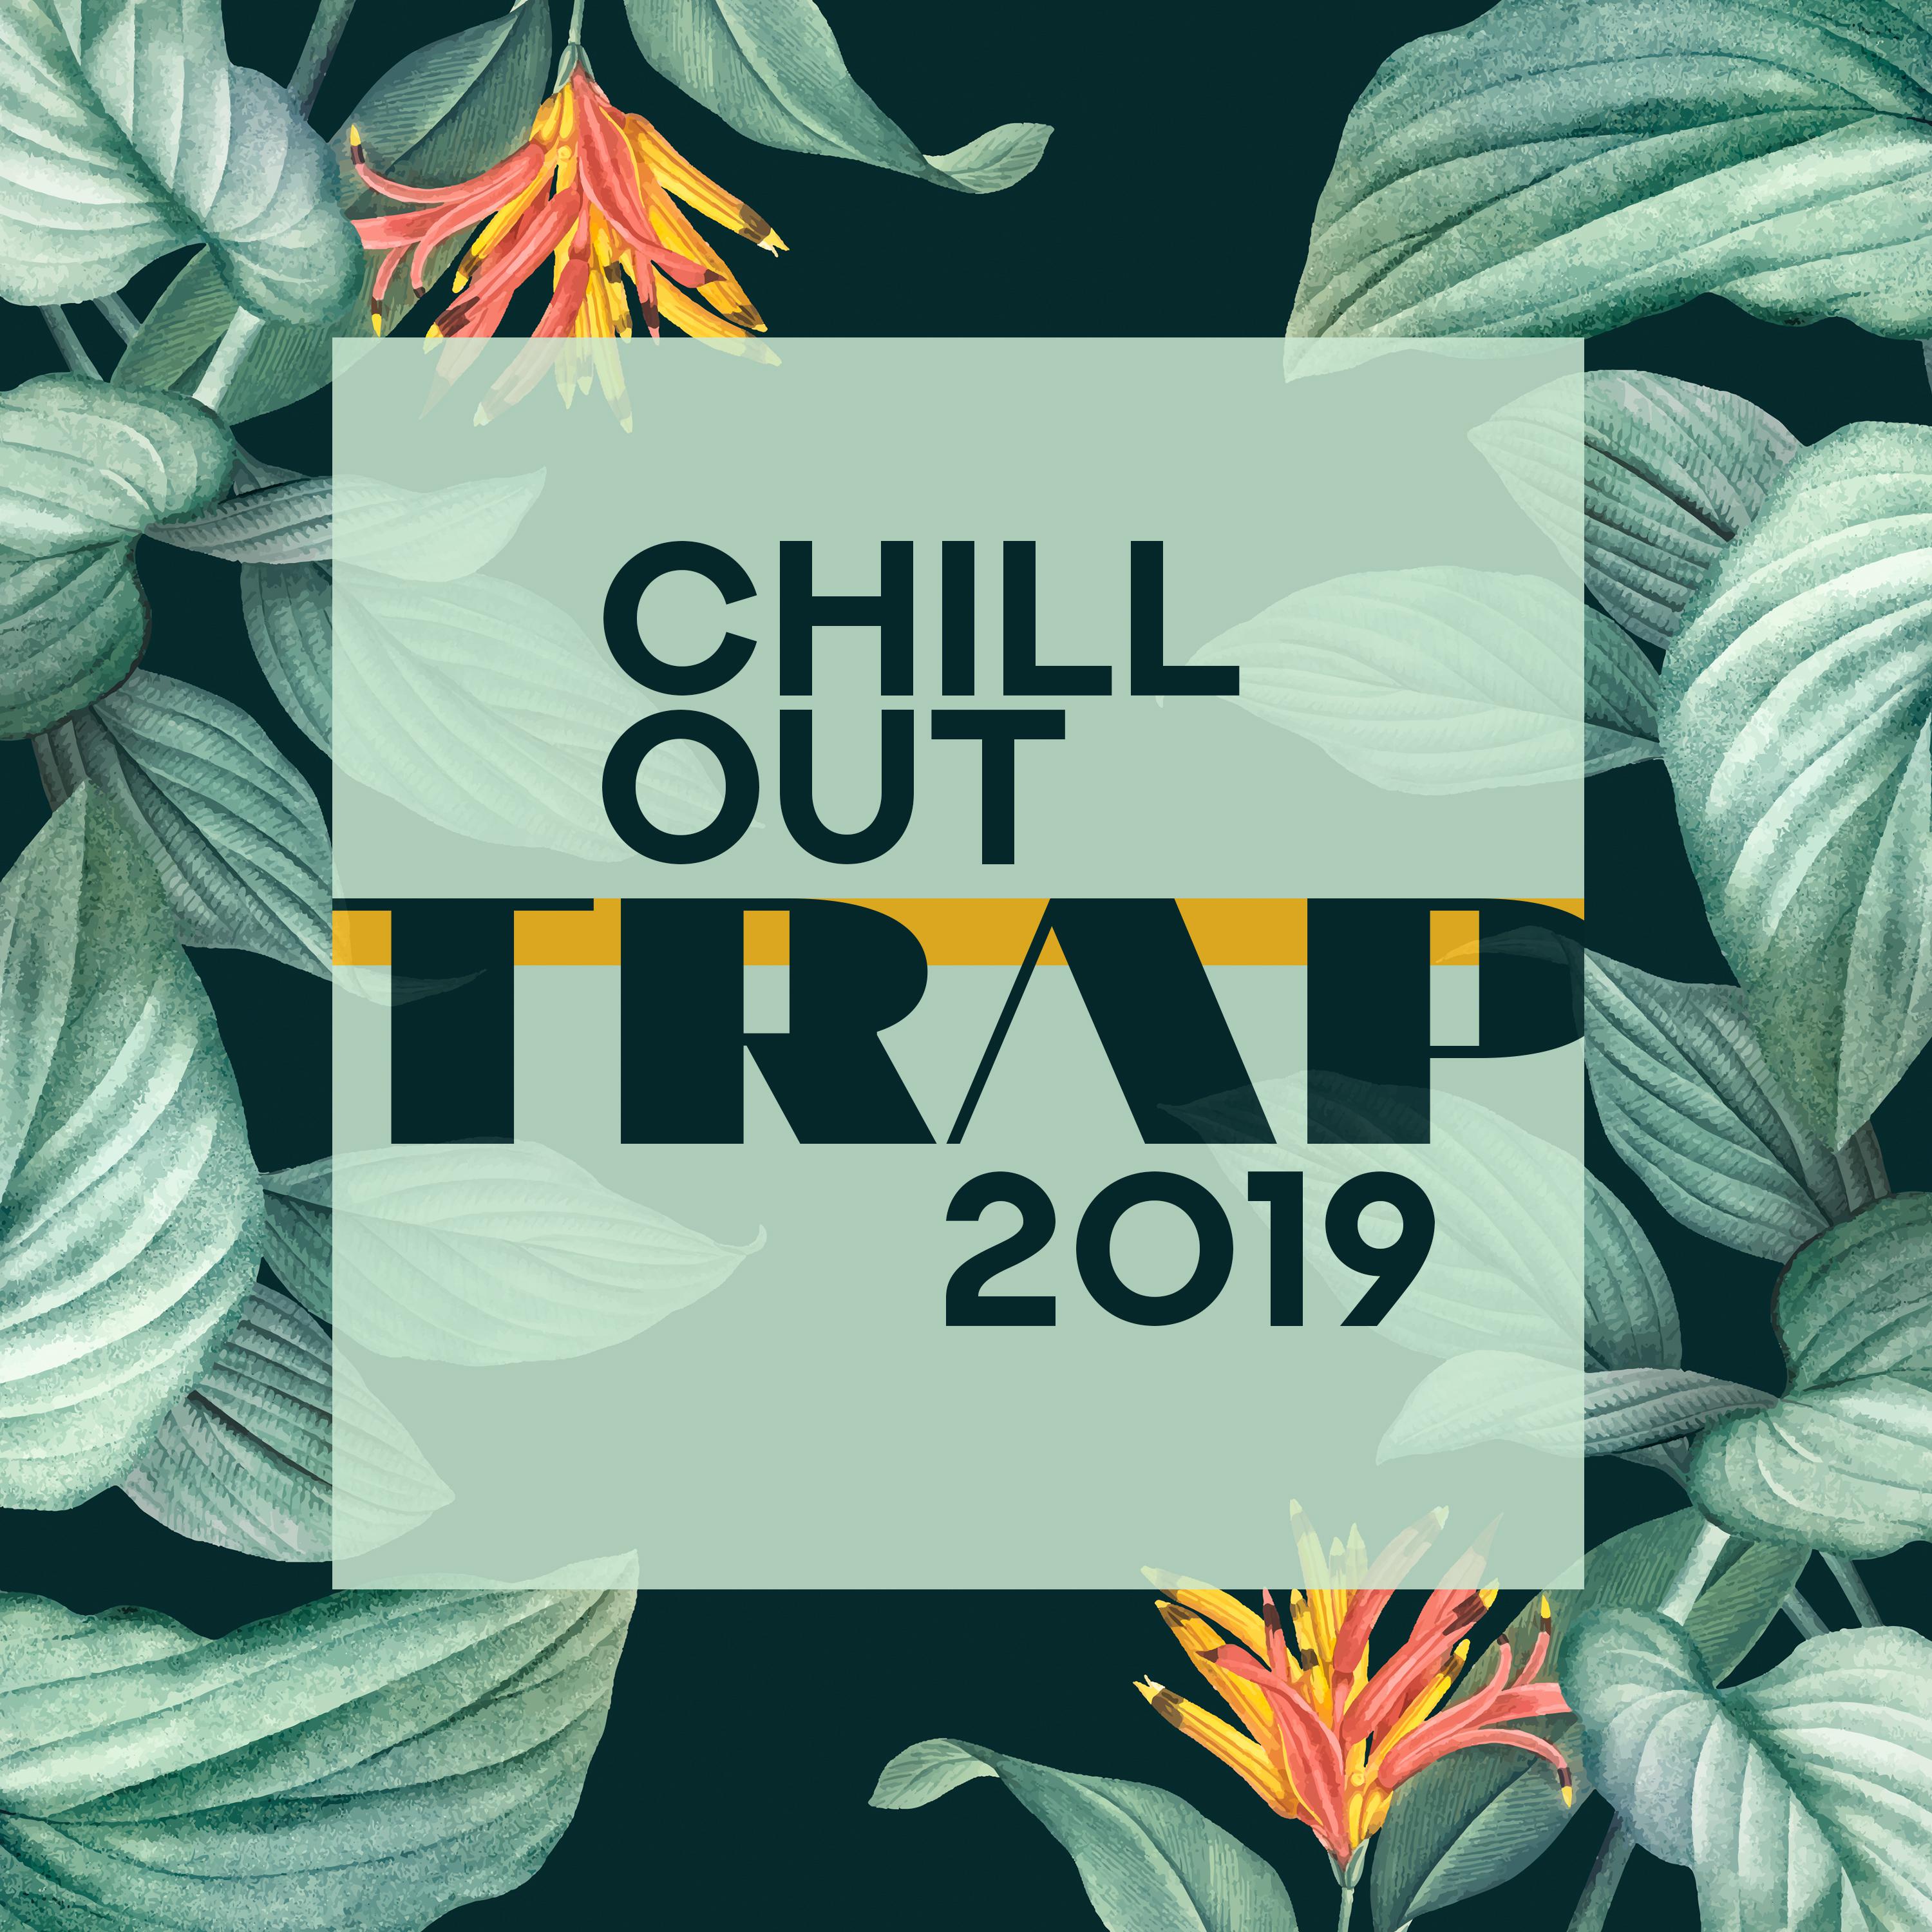 Chill Out Trap 2019